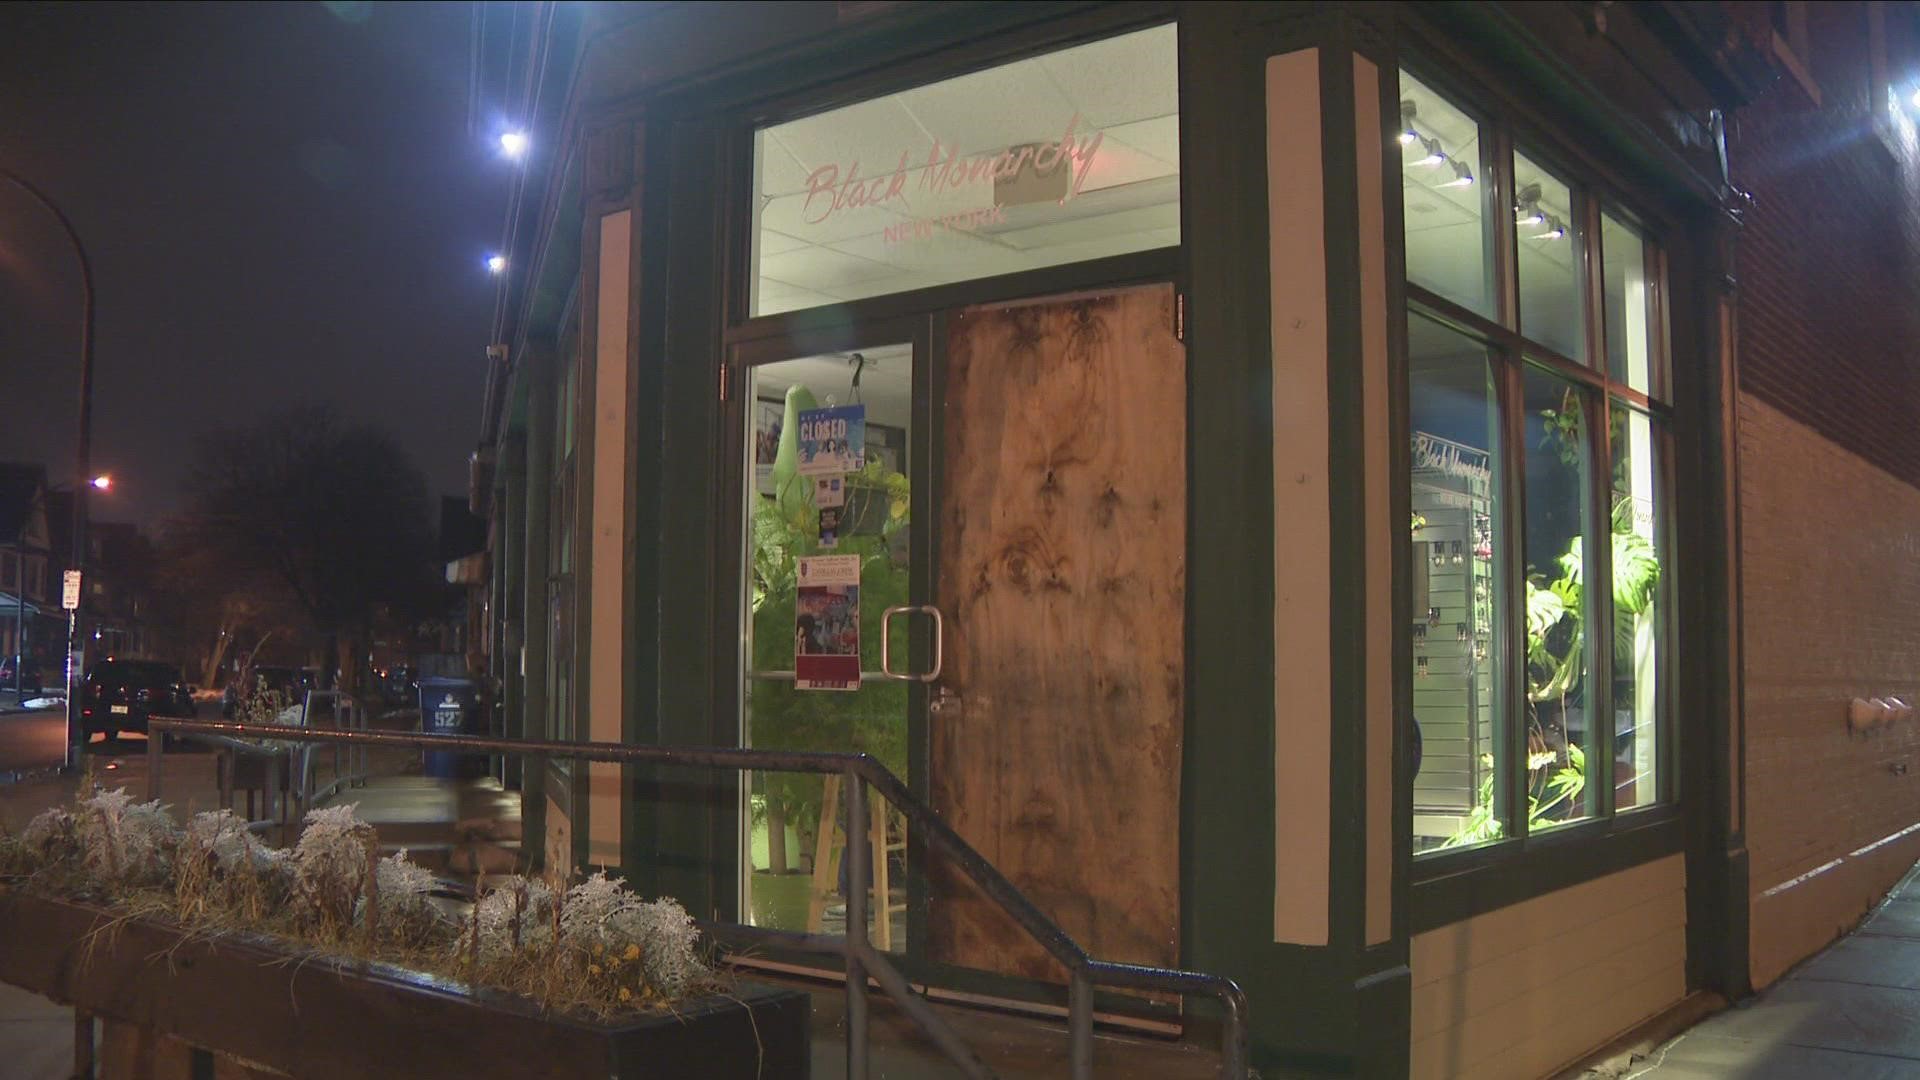 Black Monarchy on West Utica Street had their door smashed out. The owners of the shop said that they are "both devastated and heartbroken by this violation."